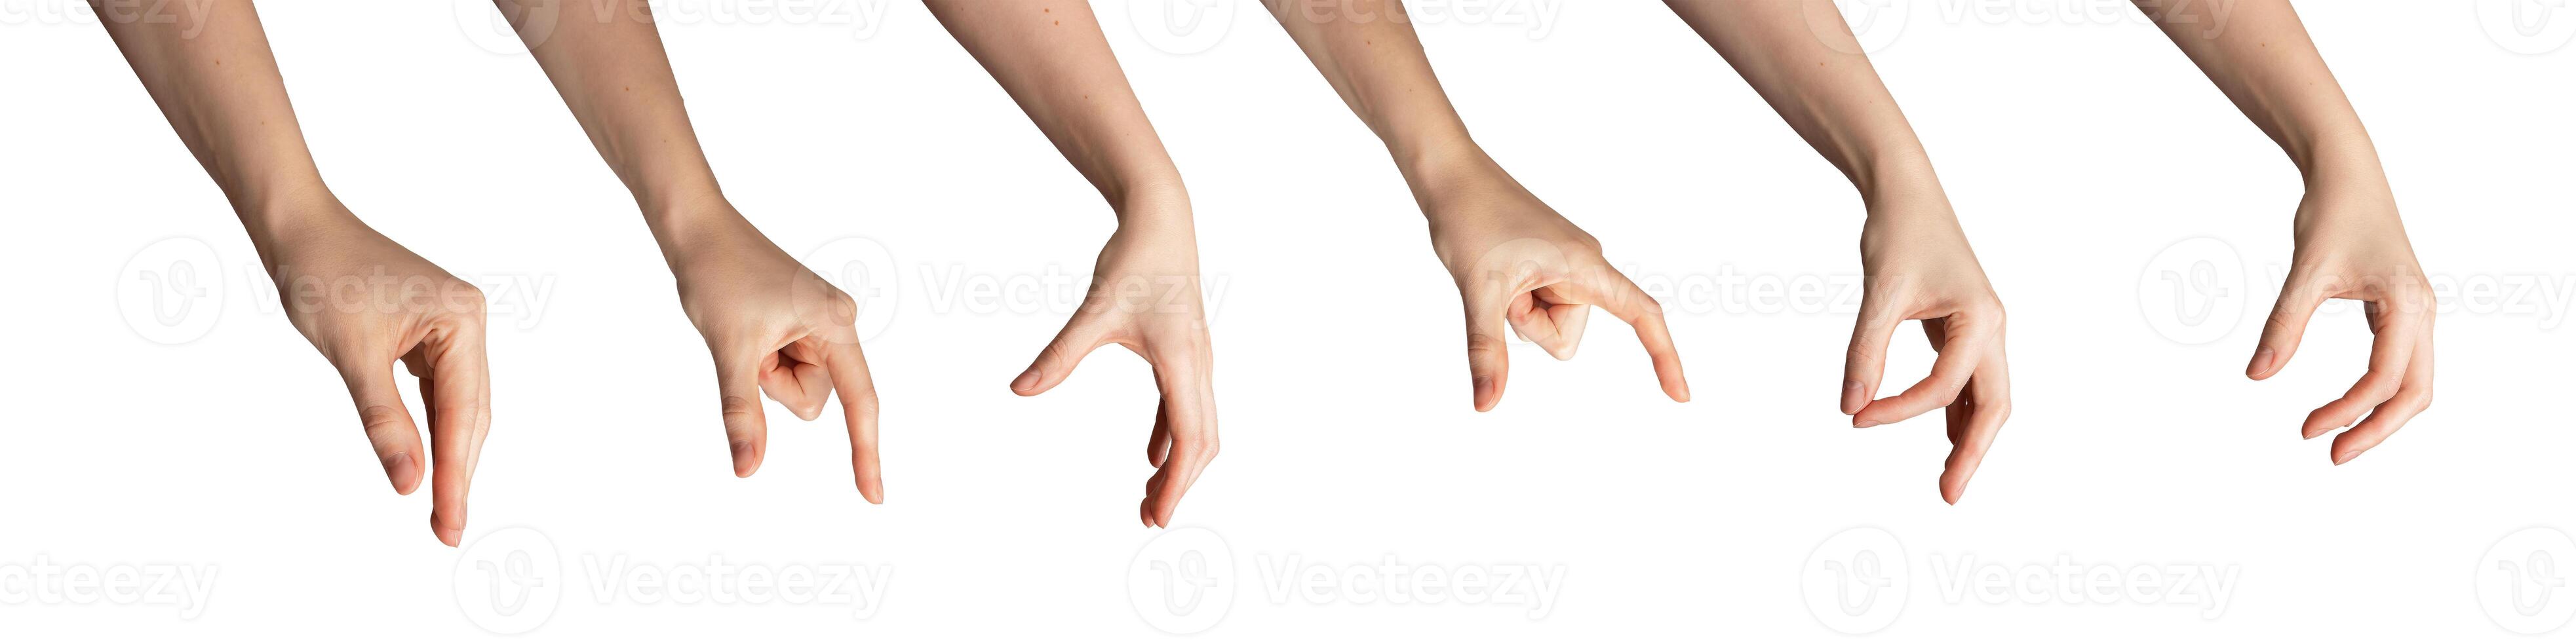 Female hand showing gestures. White palm, arm, fingers in various signs. Concept isolated icon set. photo